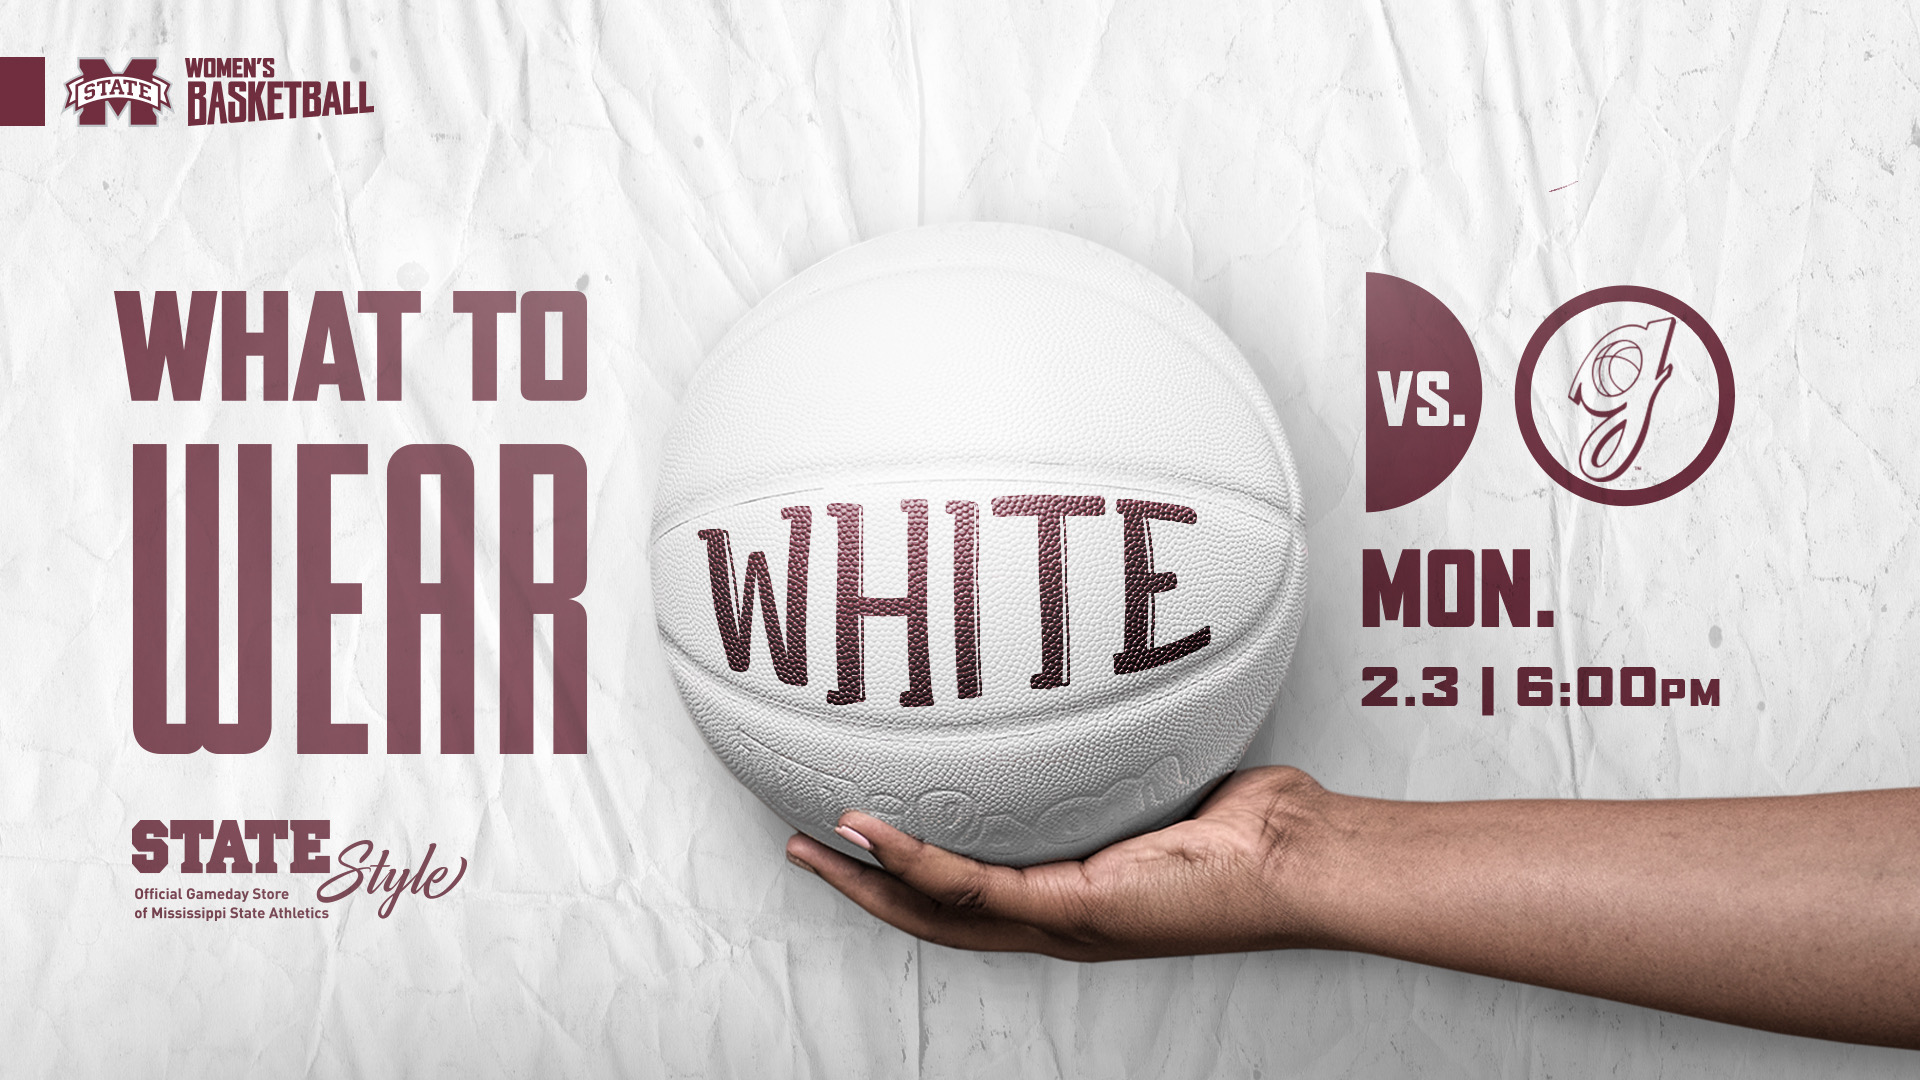 Promotional graphic for MSU women's basketball white-out game